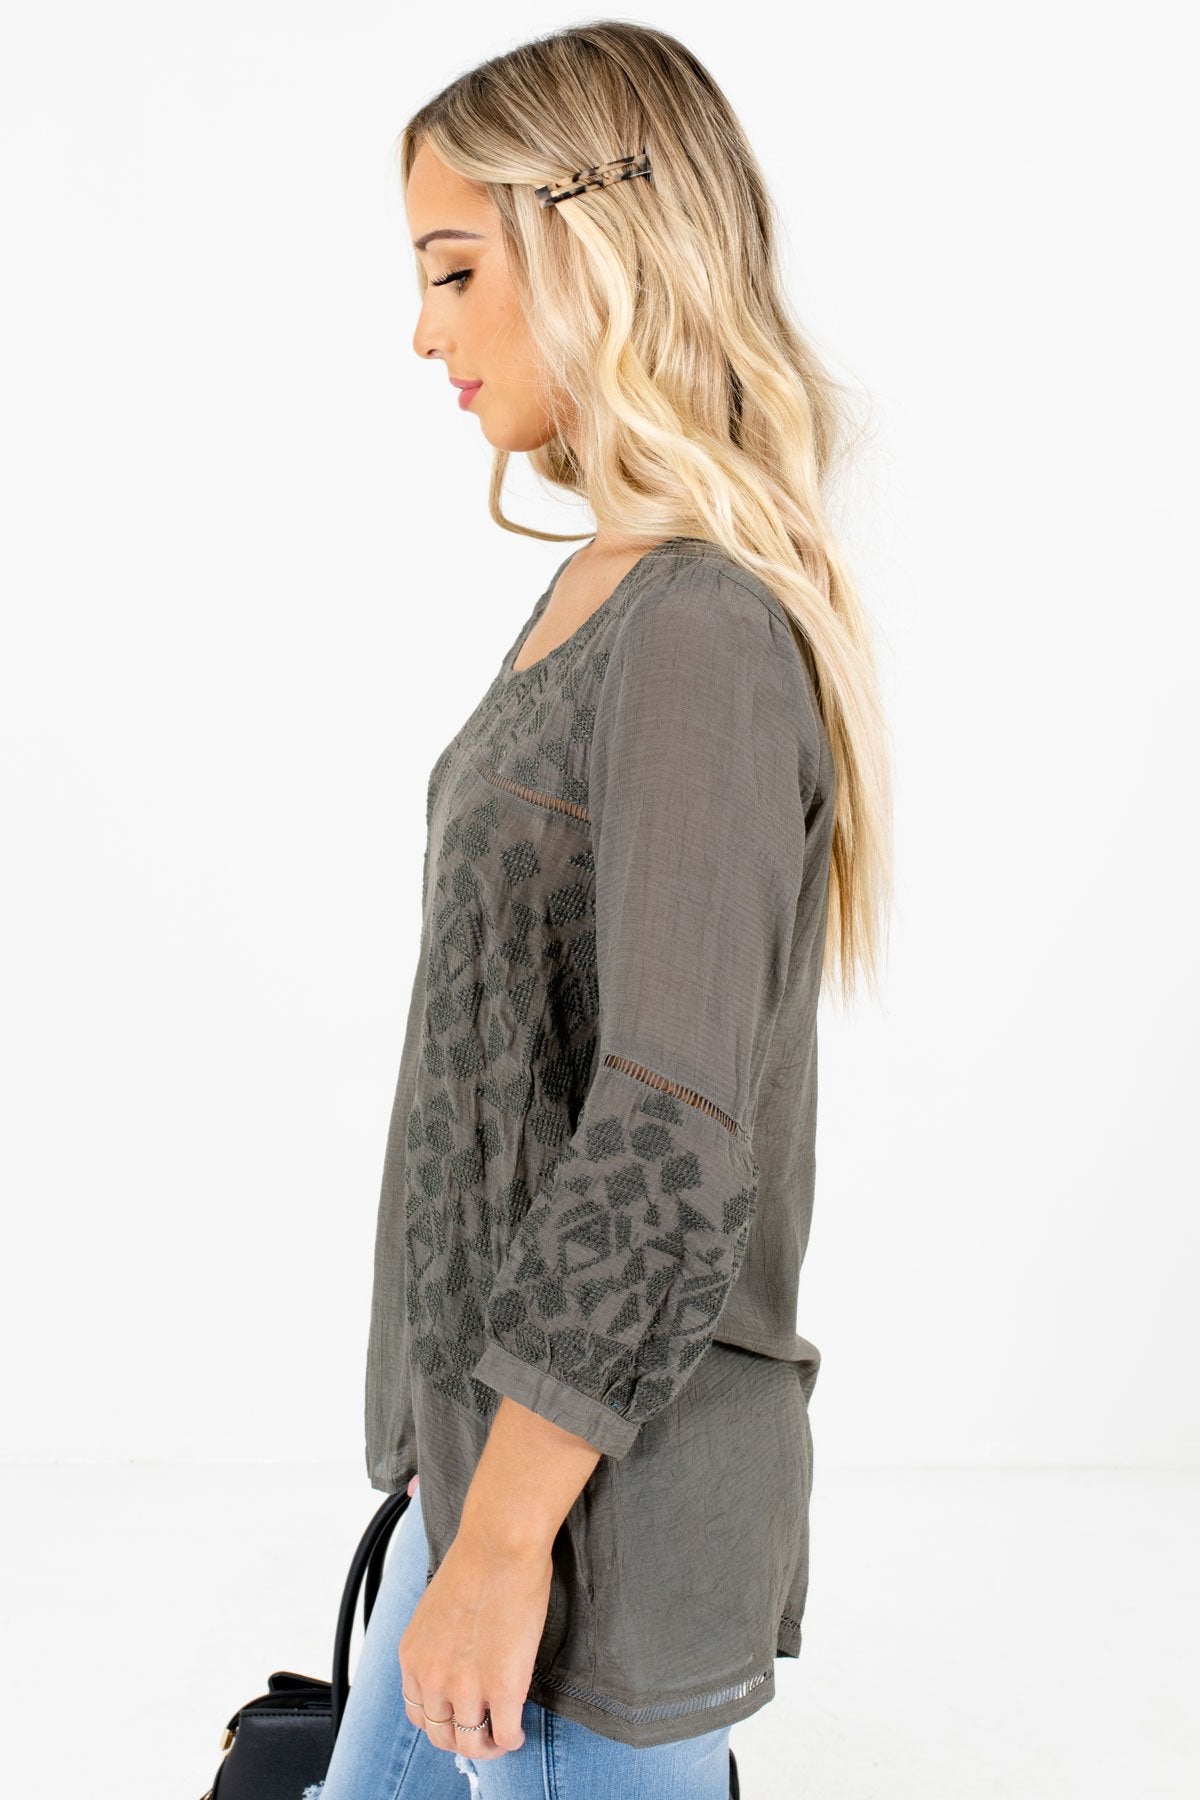 Olive Green High-Low Hem Boutique Tops for Women